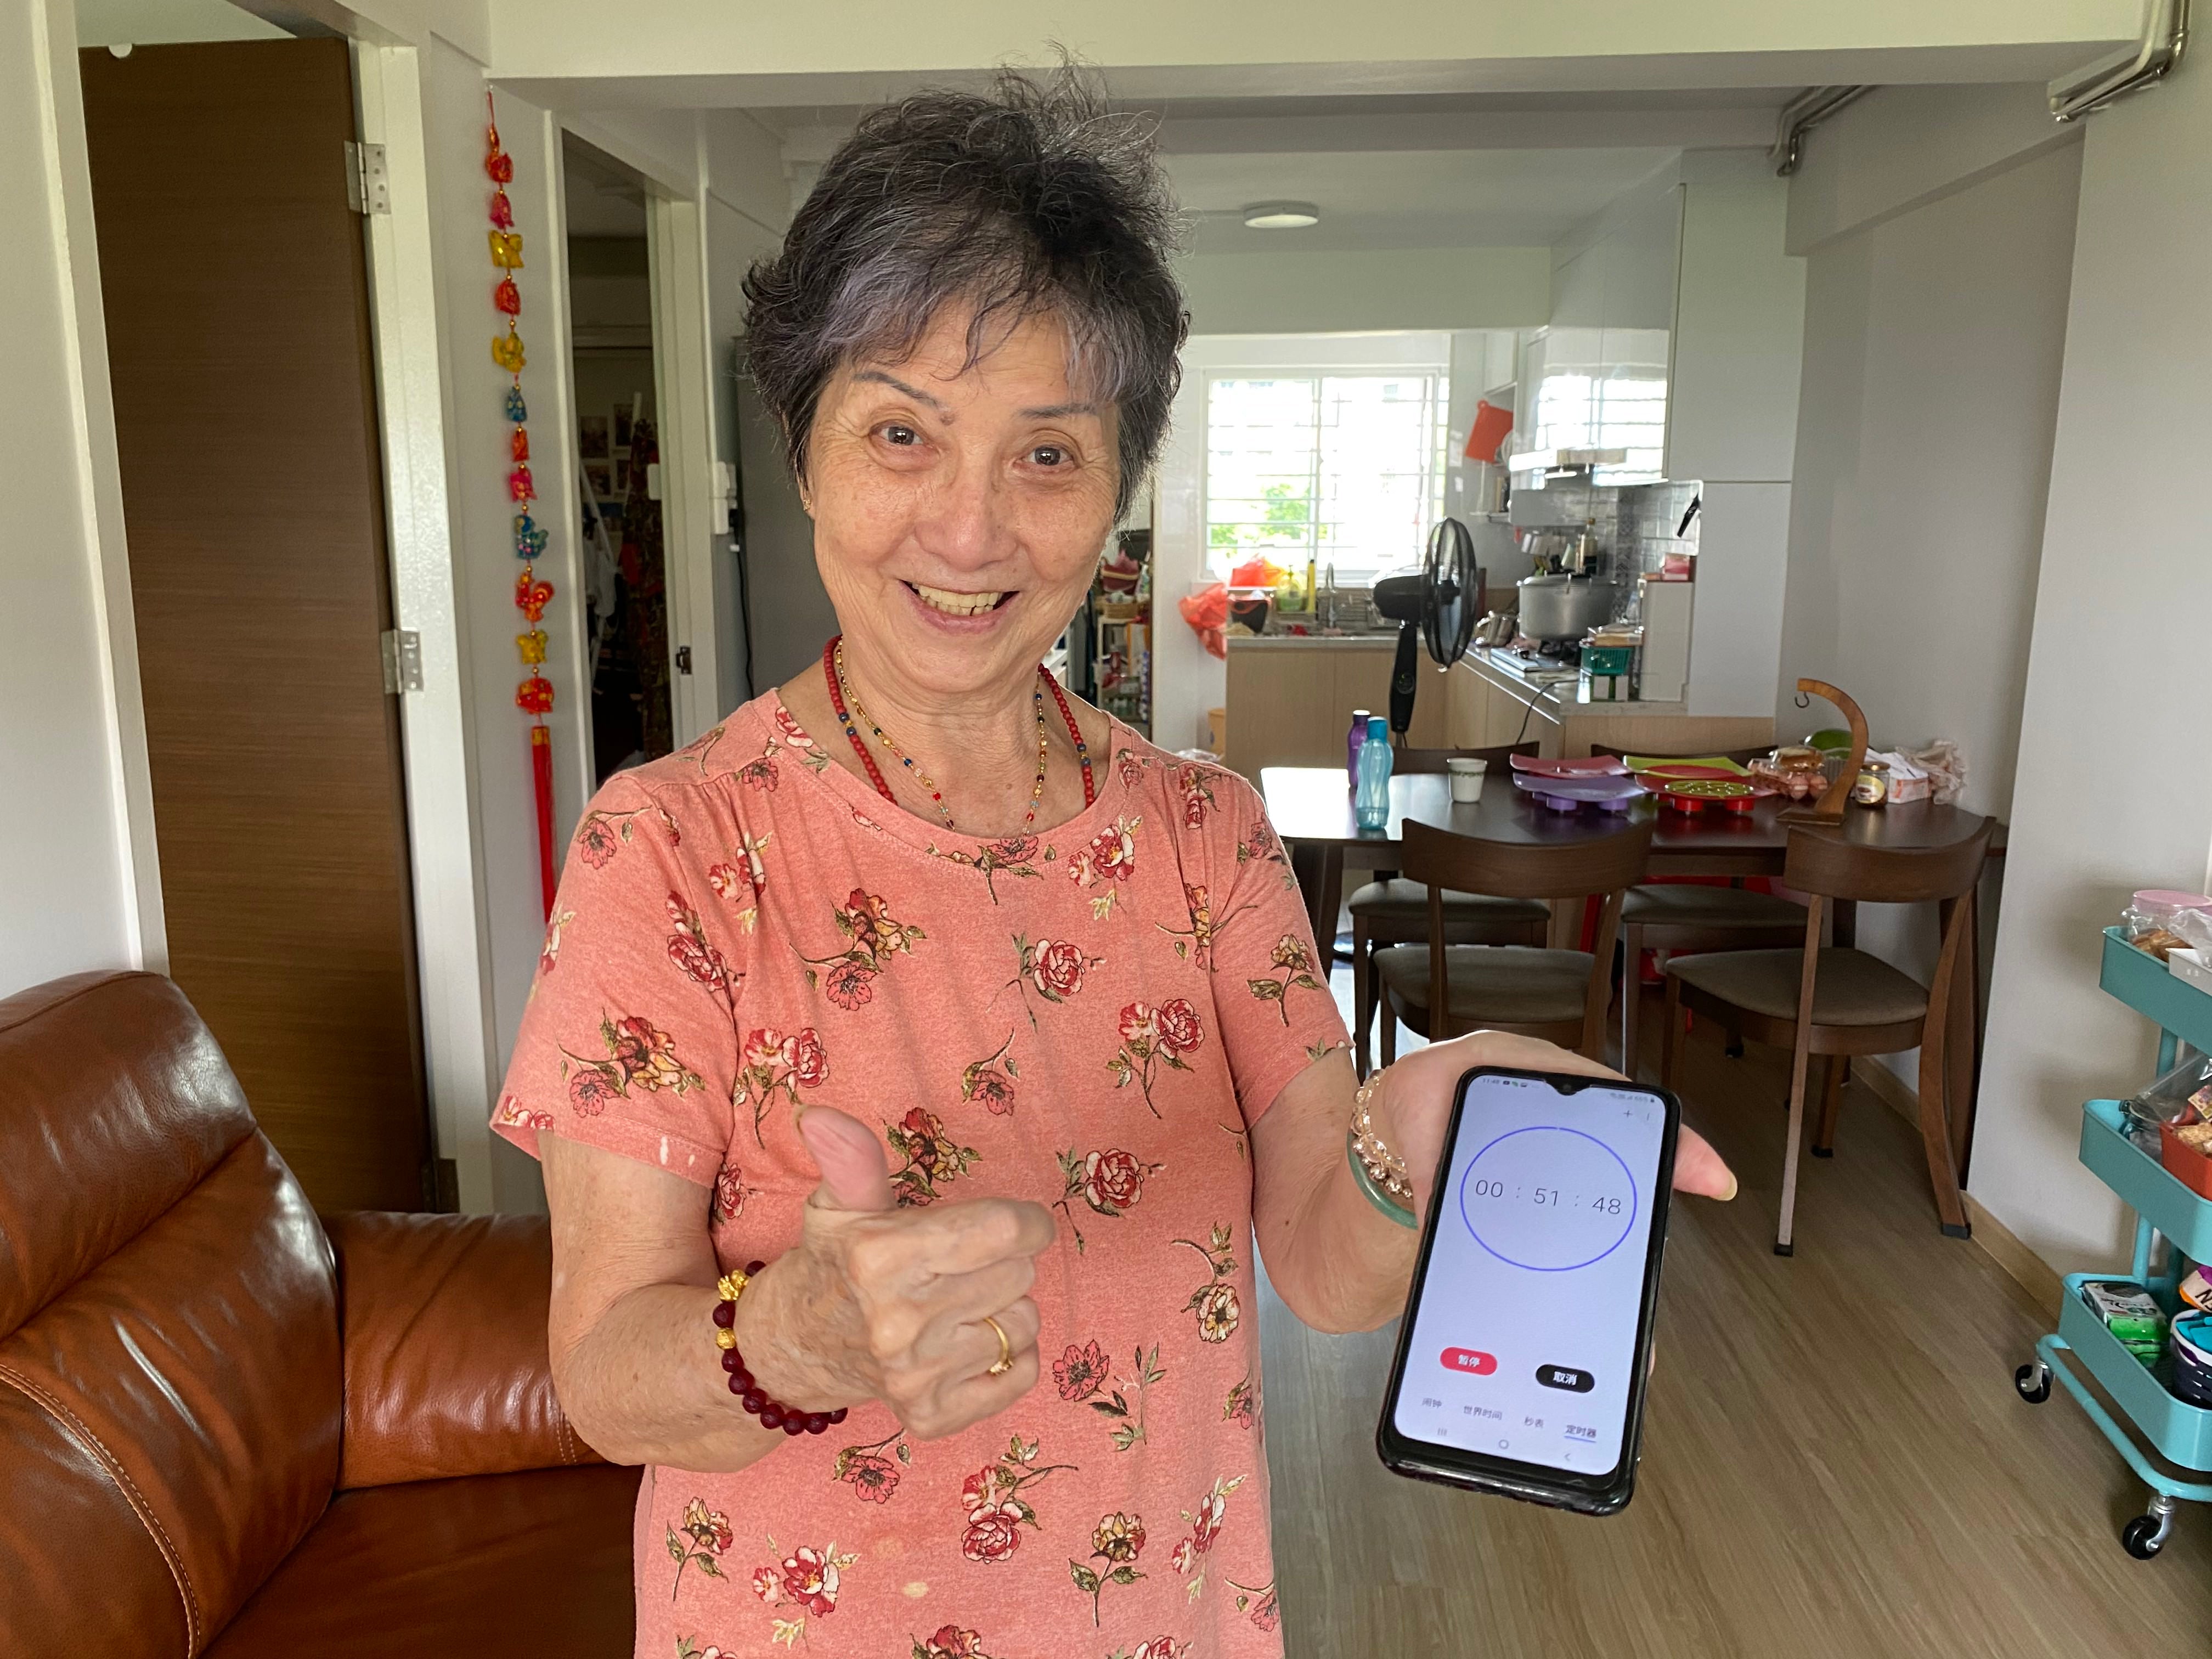 Grandma Hong showing off the new feature she learnt - setting a timer on her Phone